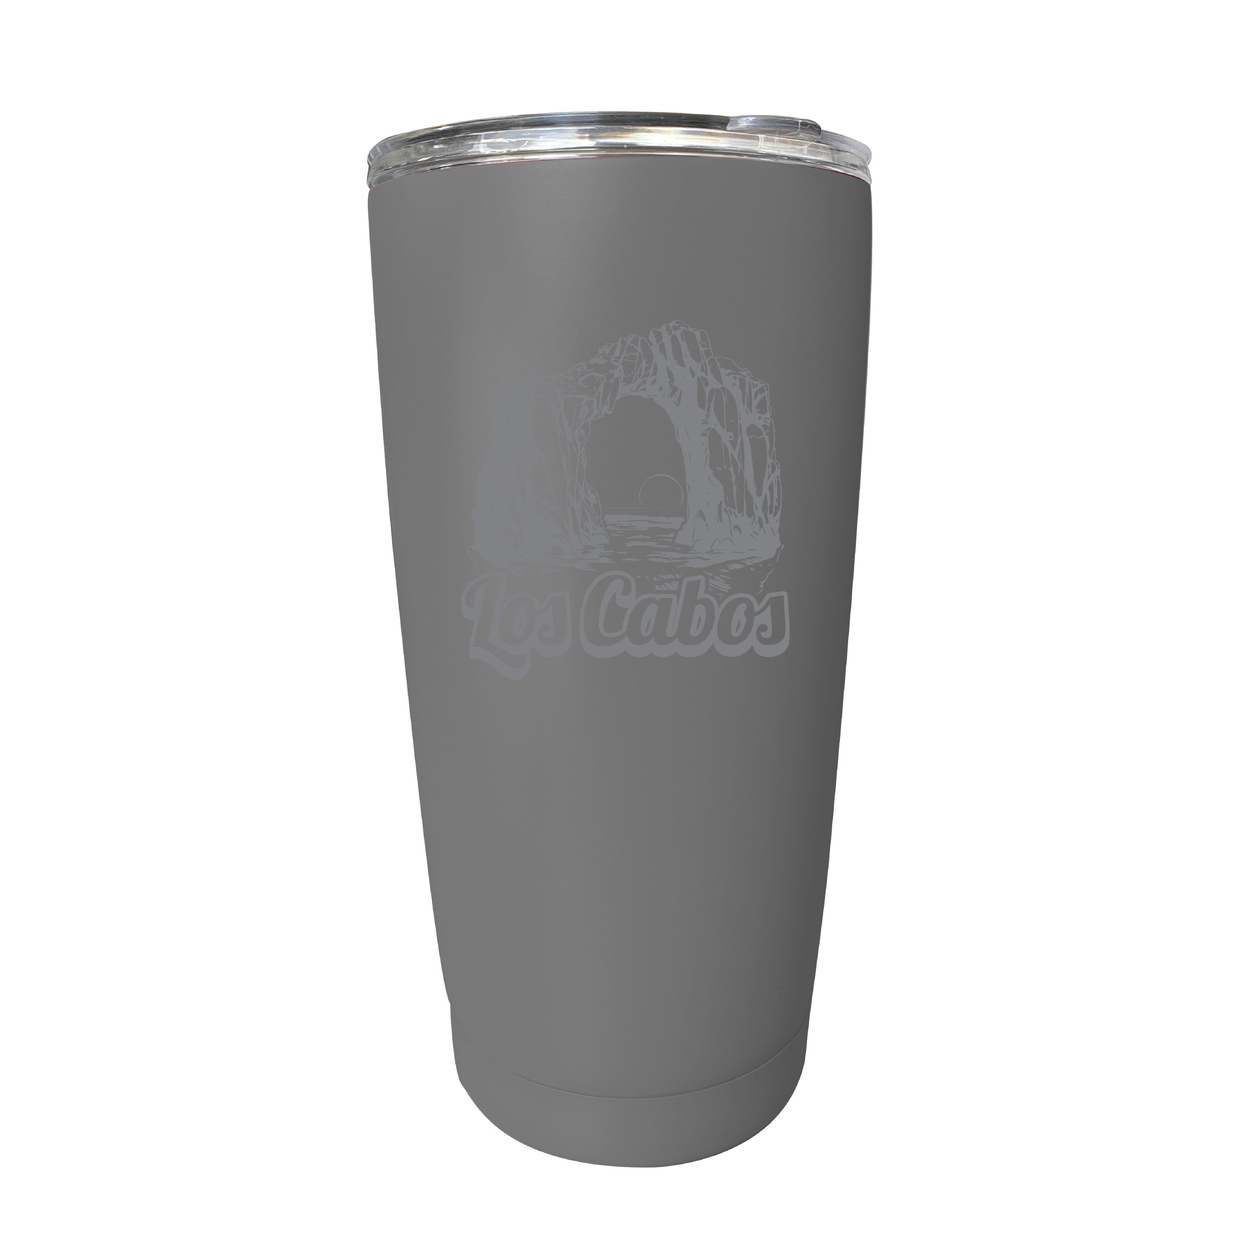 Los Cabos Mexico Souvenir 16 Oz Engraved Stainless Steel Insulated Tumbler - Gray,,4-Pack